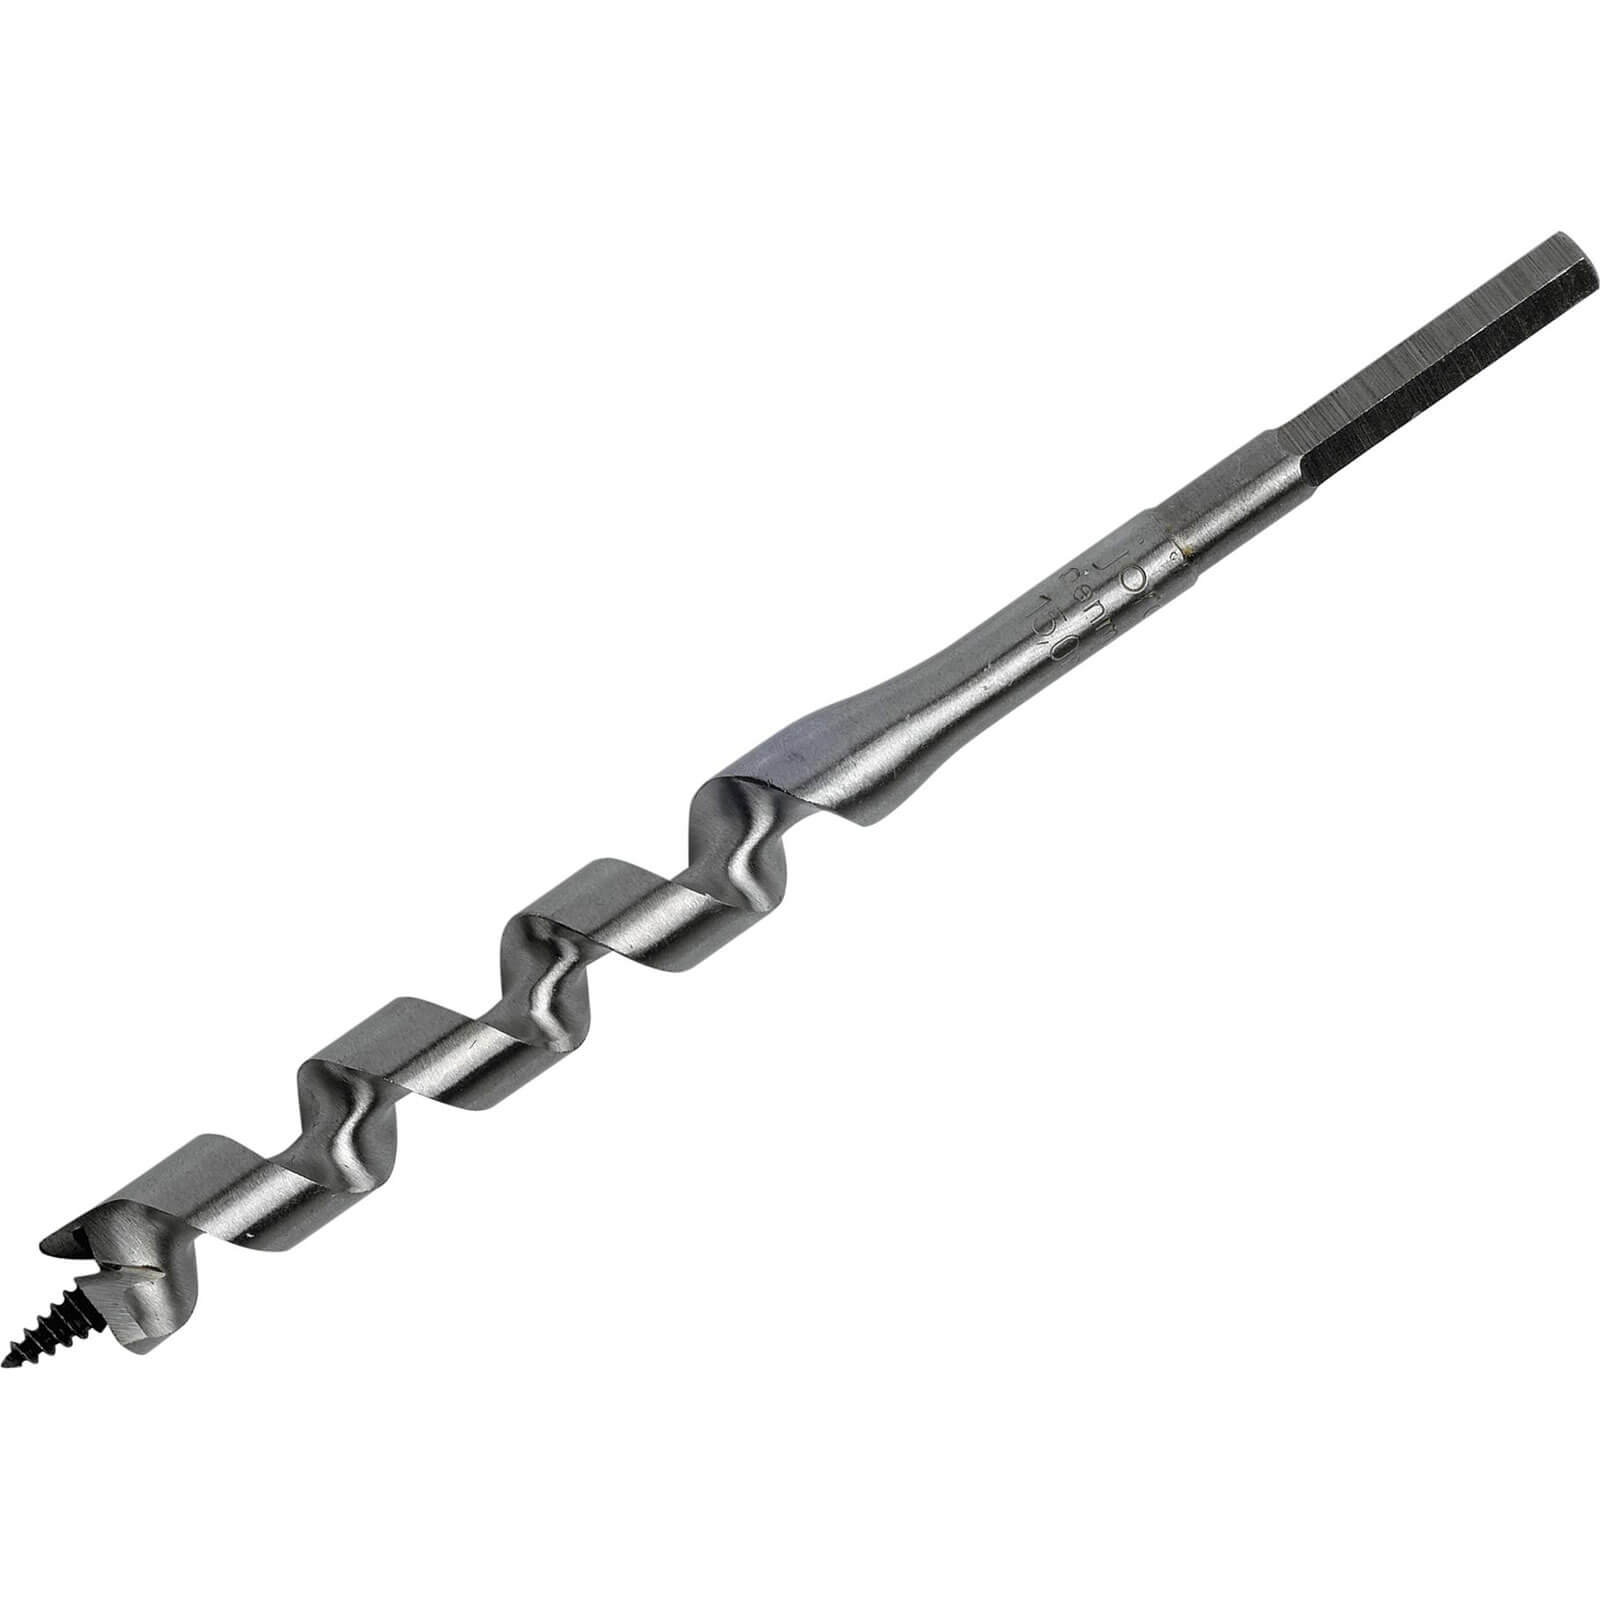 Image of Irwin Wood Auger Drill Bit 5mm 150mm